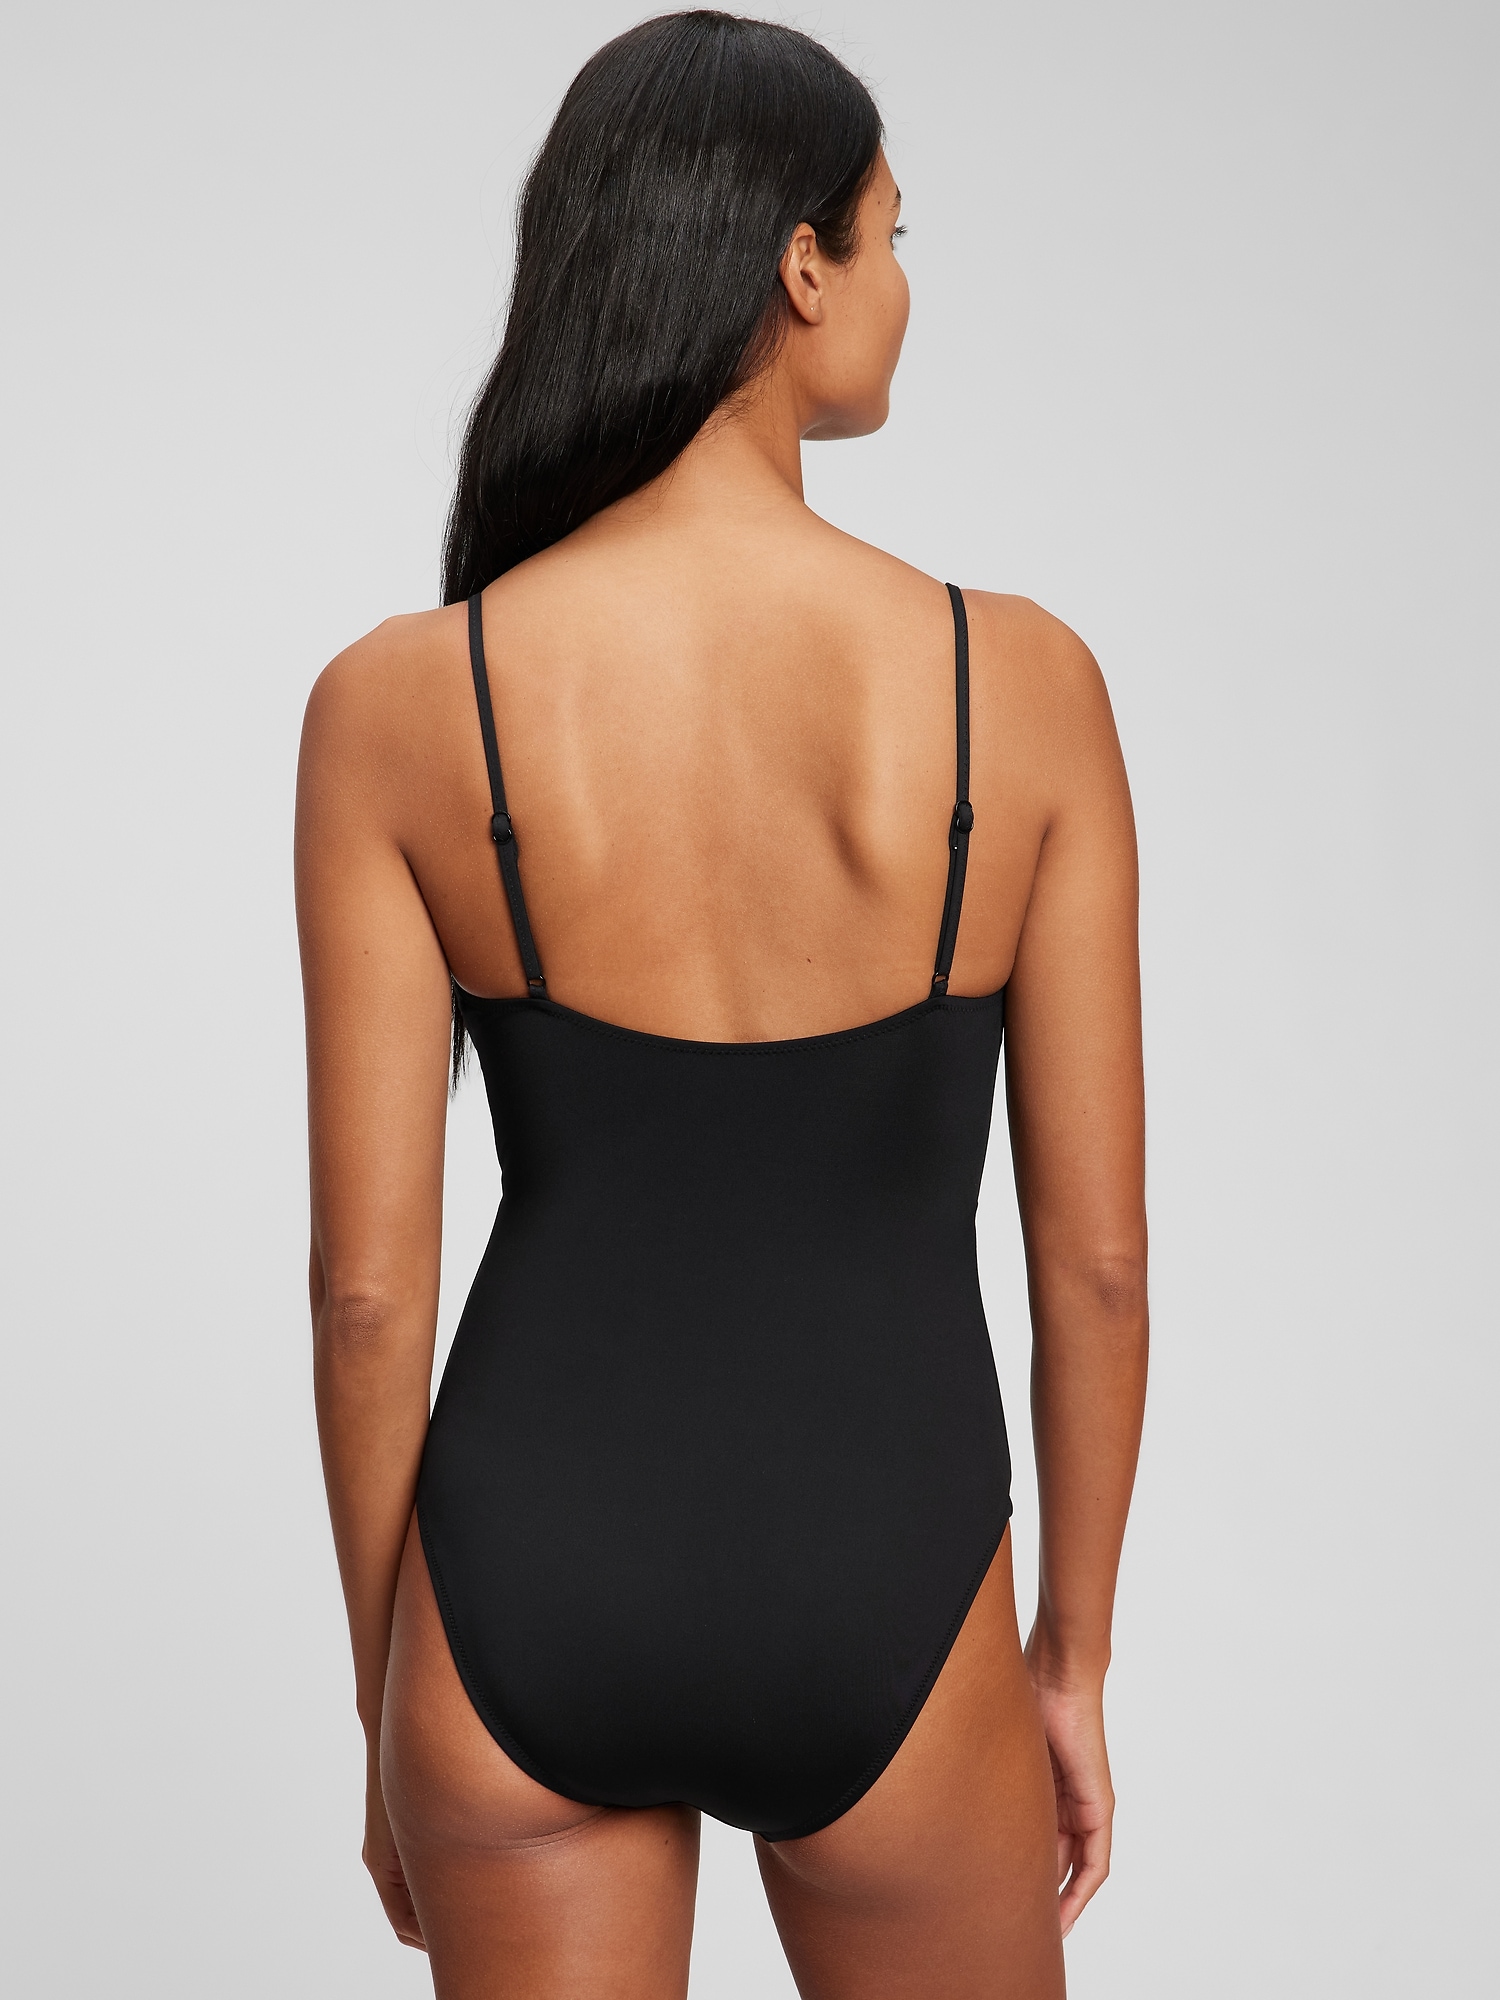 Recycled Bunny-Tie Cutout One-Piece Swimsuit | Gap